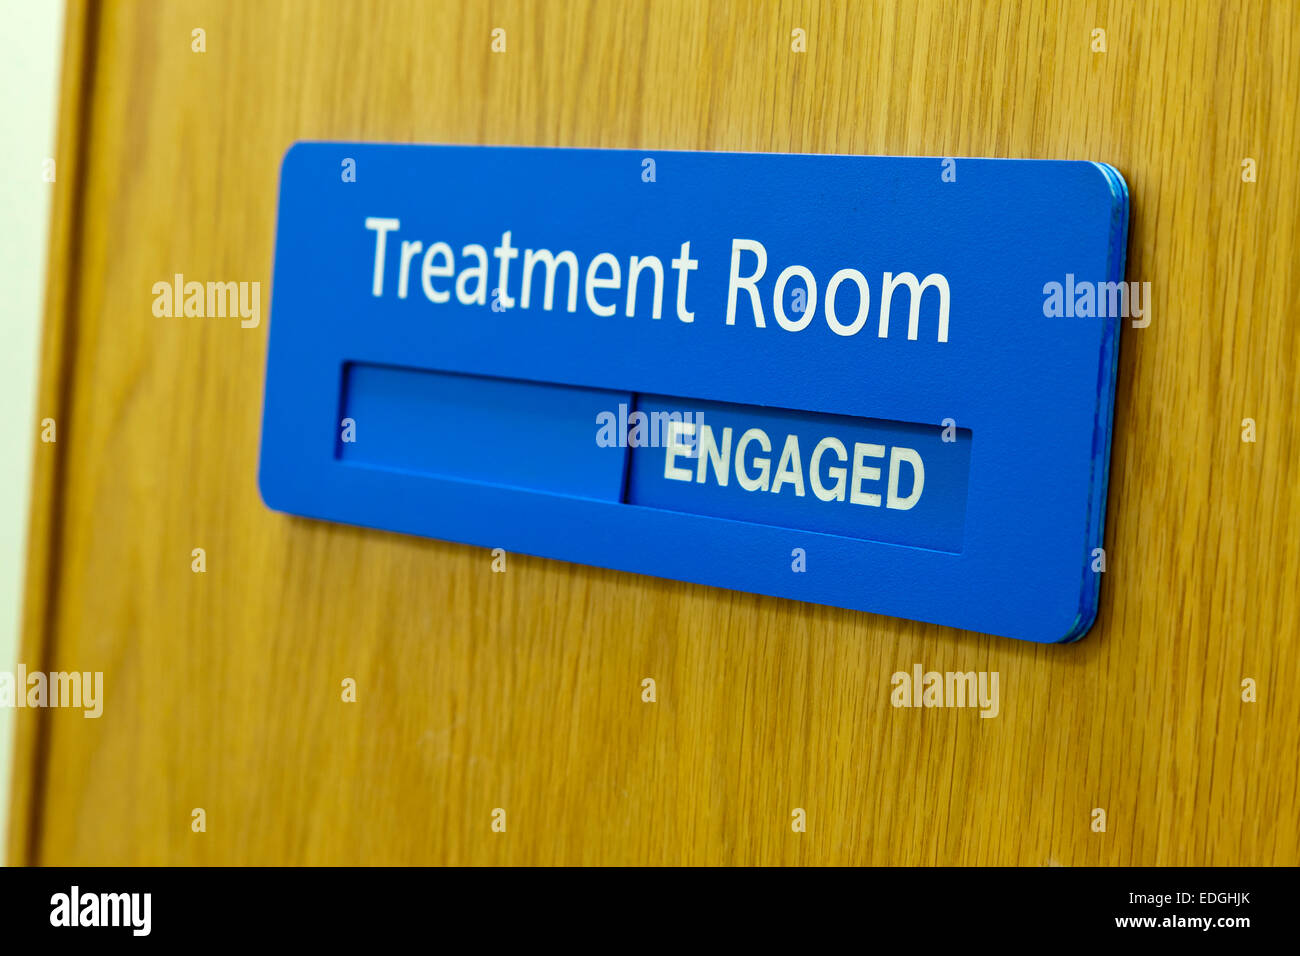 Treatment Room sign on a wooden door in a hospital with the Engaged part on display Stock Photo